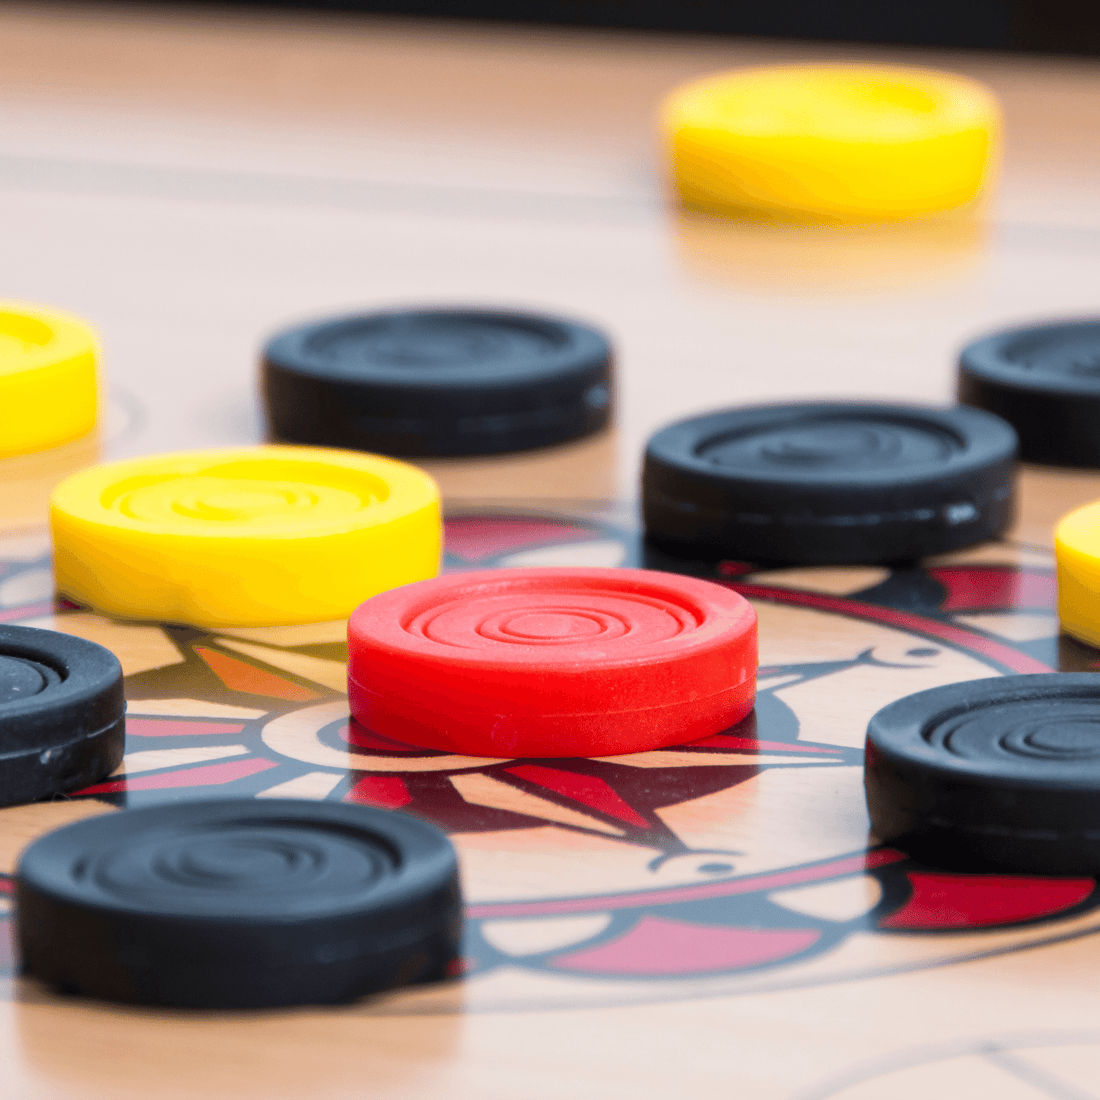 Pro tips for your carrom board maintenance